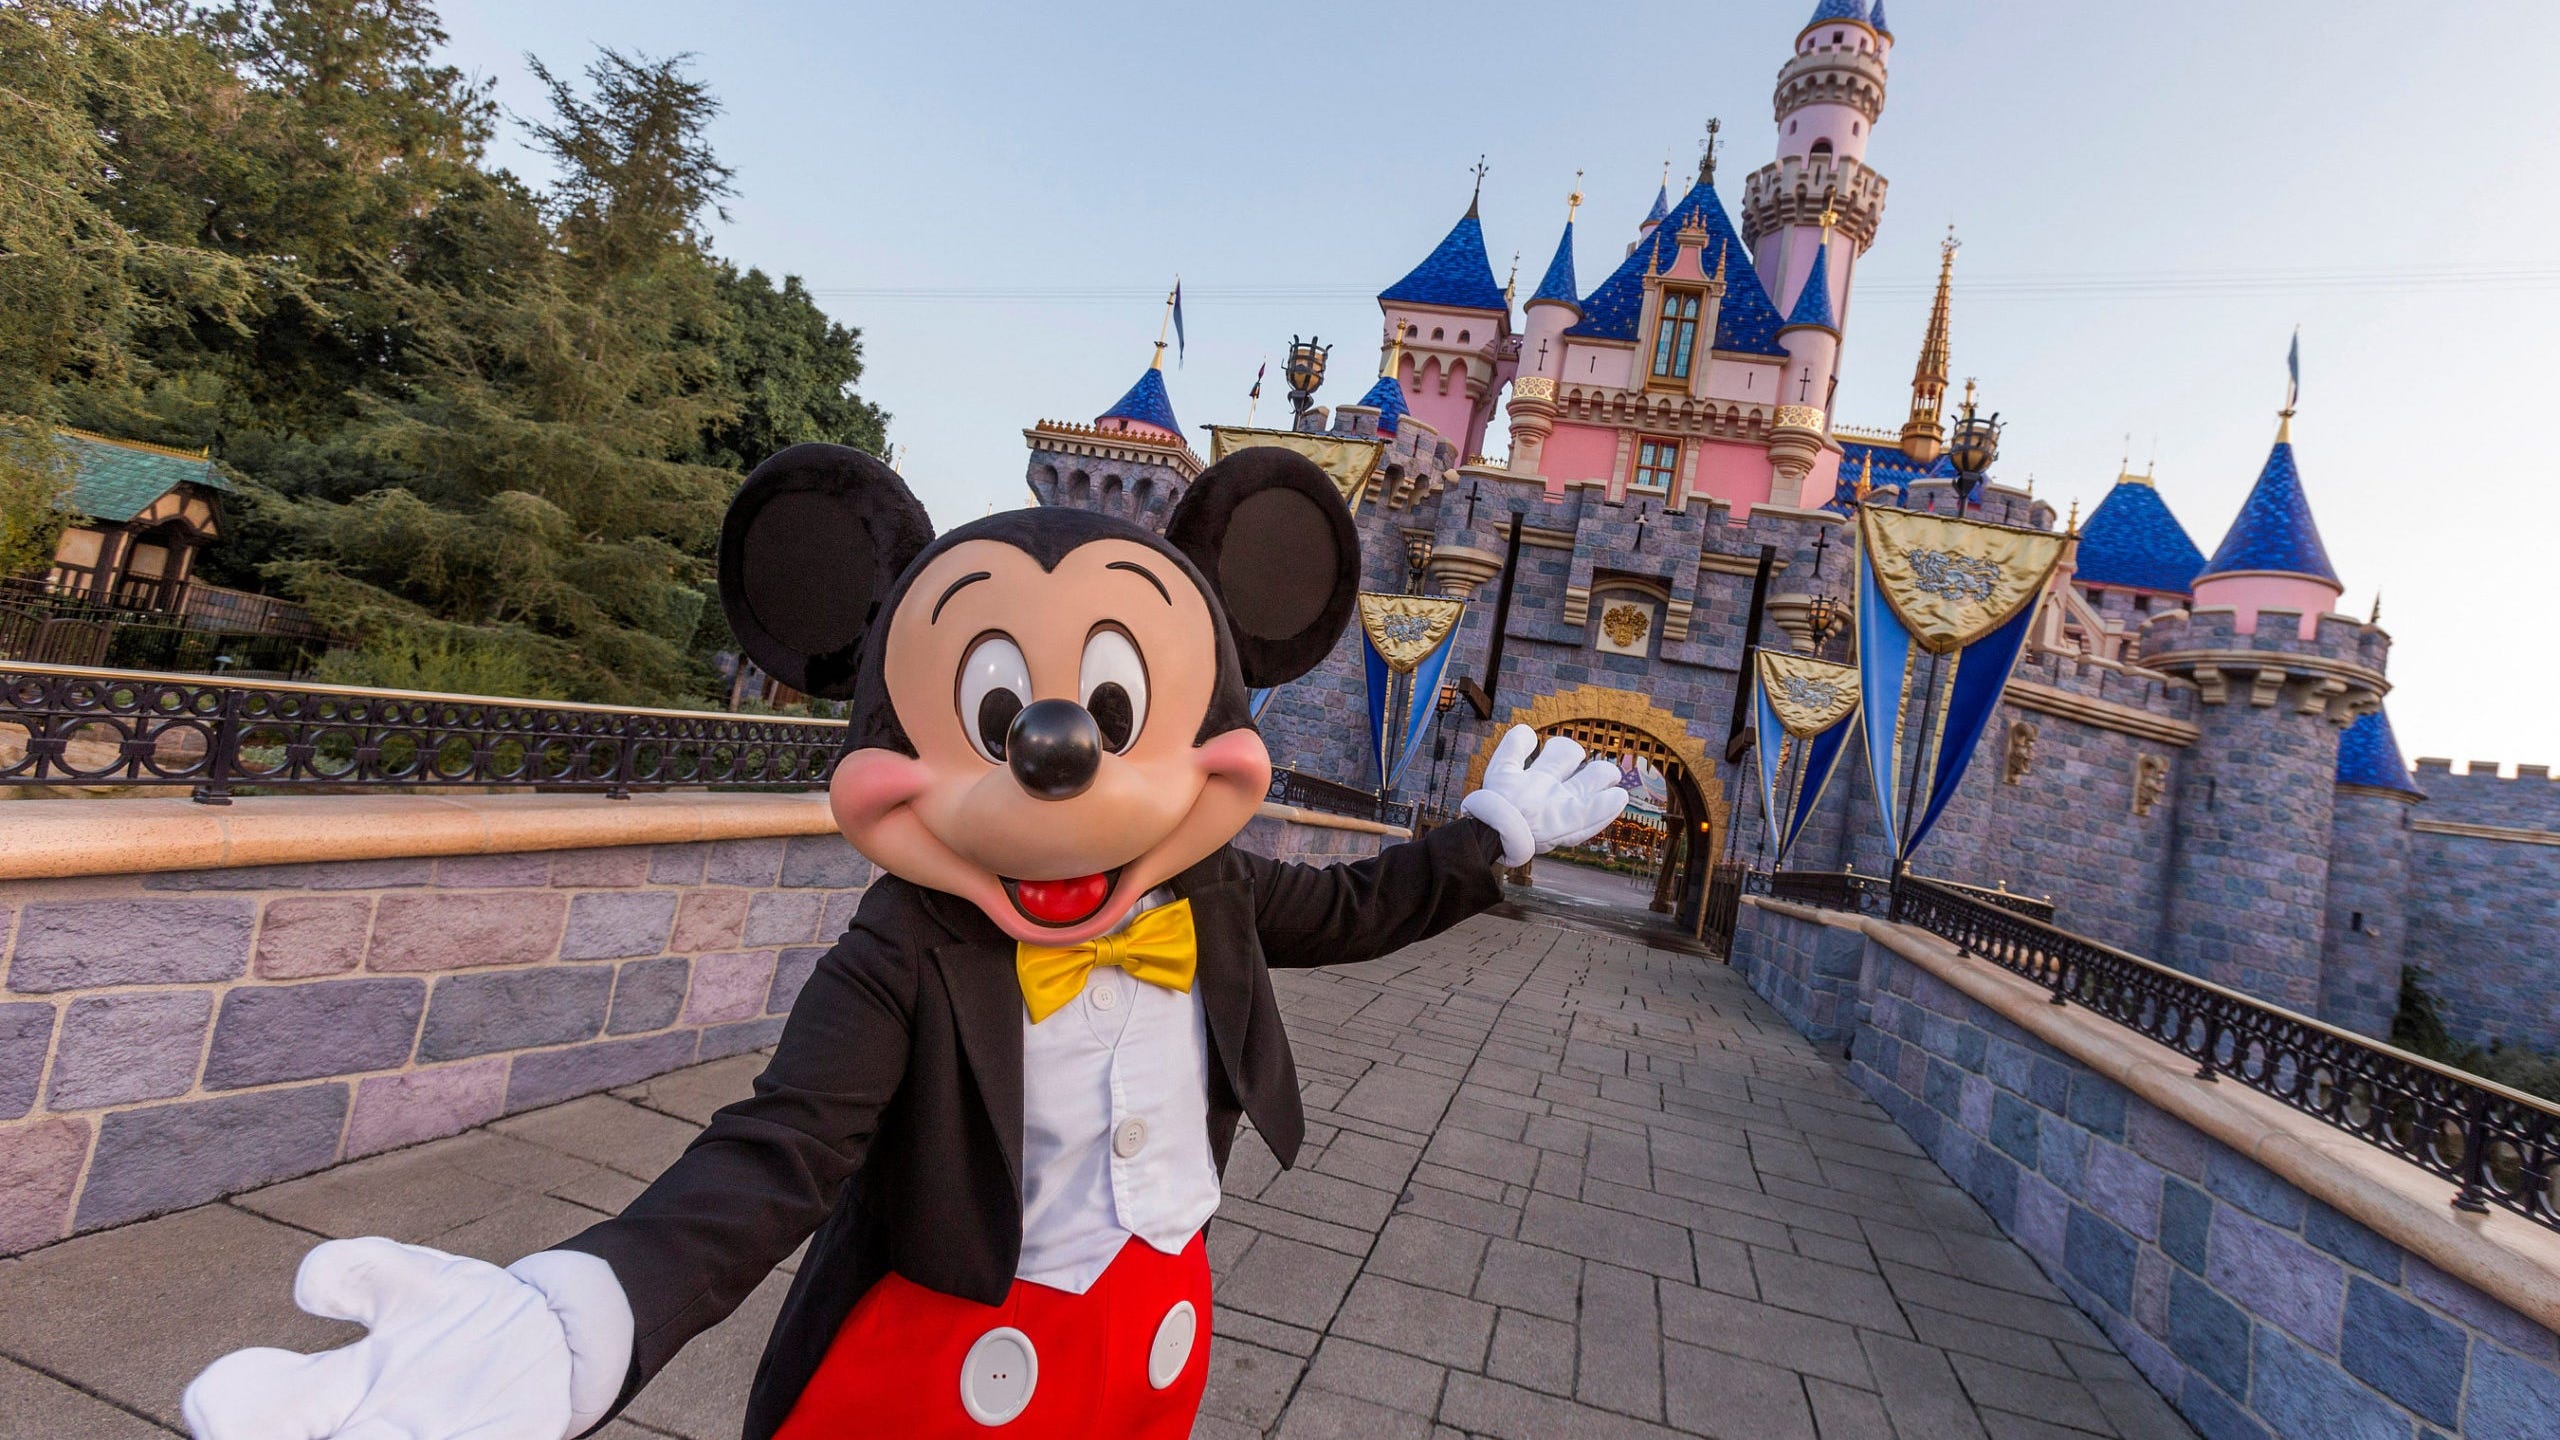 Disneyland tickets, prices, reservations shared for reopening